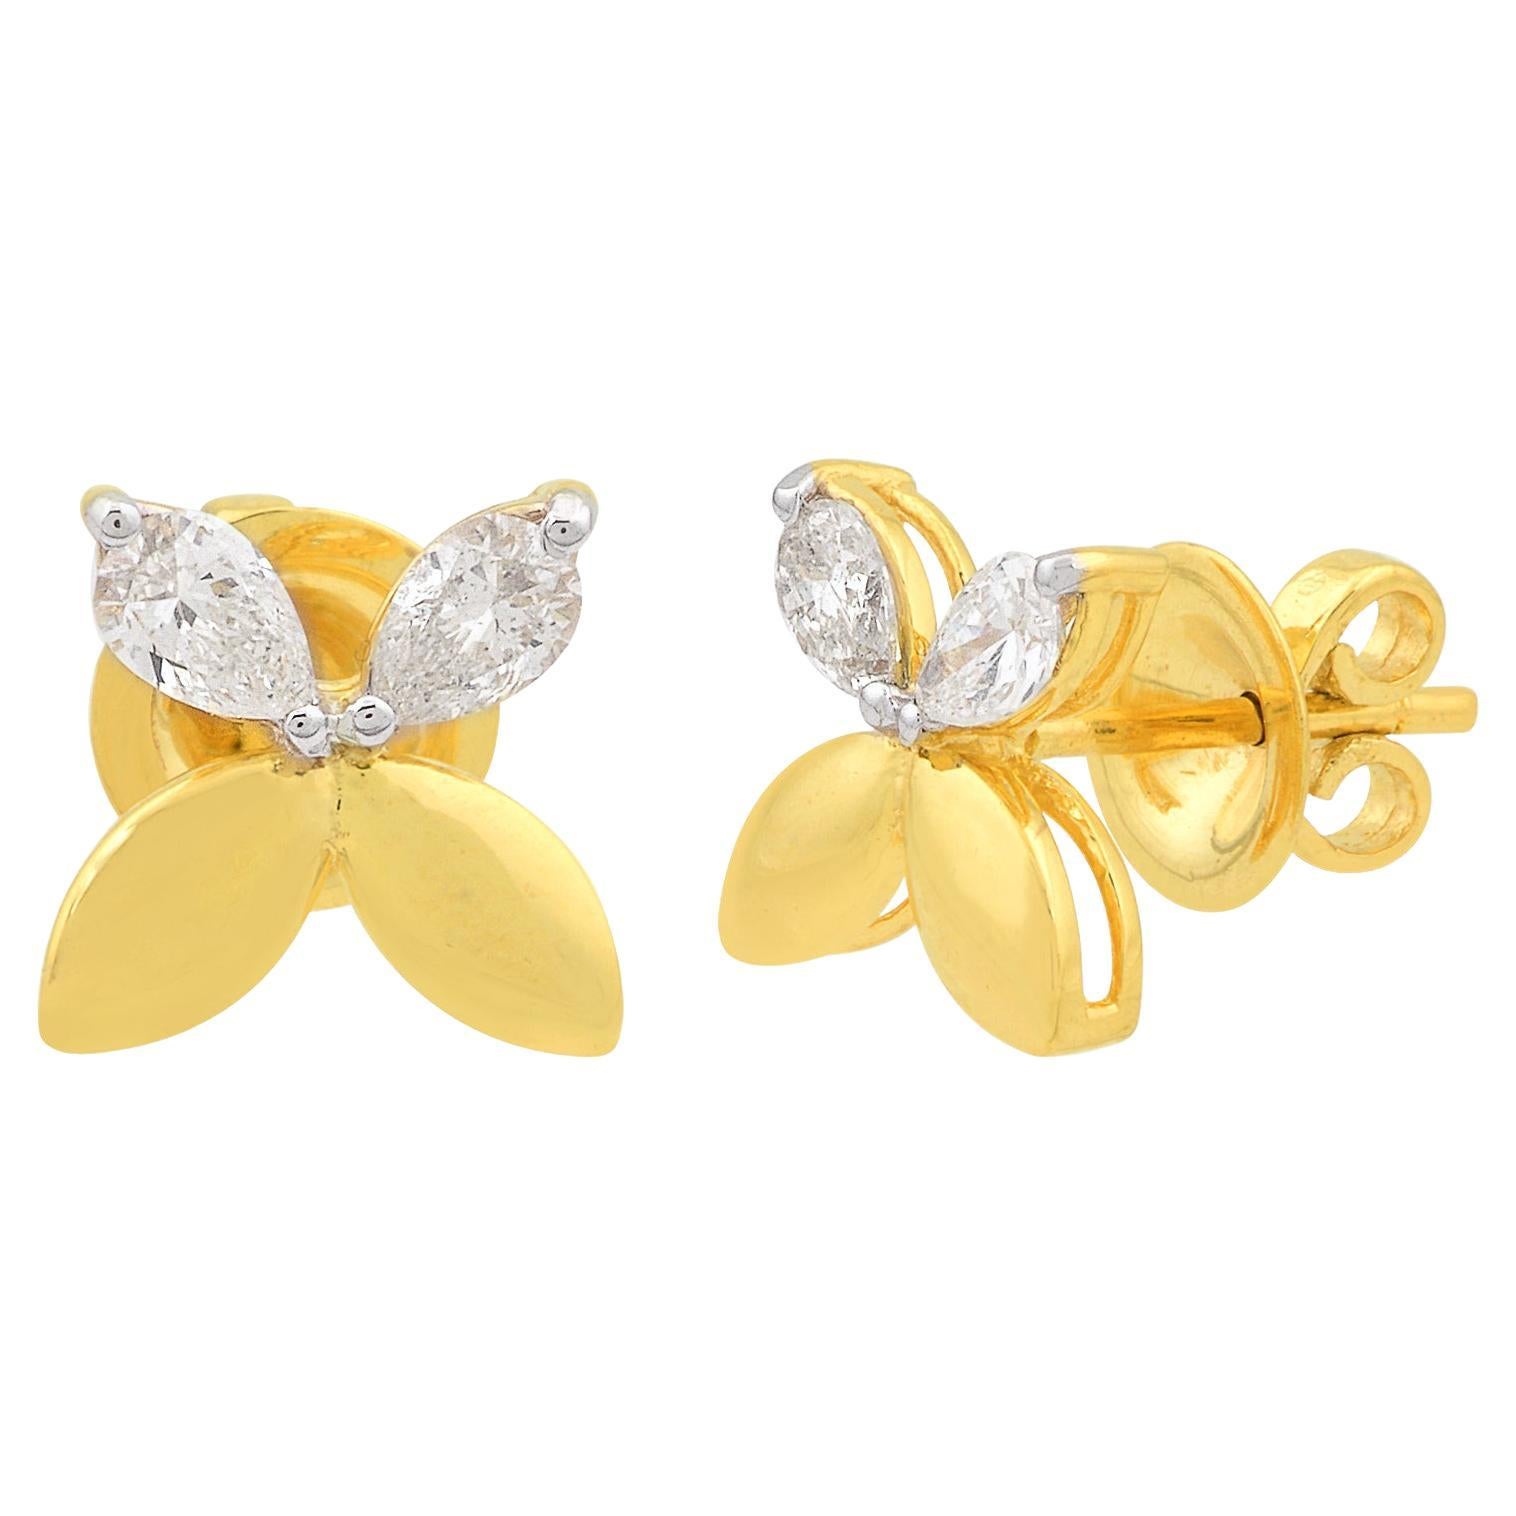 SI Clarity HI Color Pear Diamond Butterfly Stud Earrings 18k Yellow Gold Jewelry